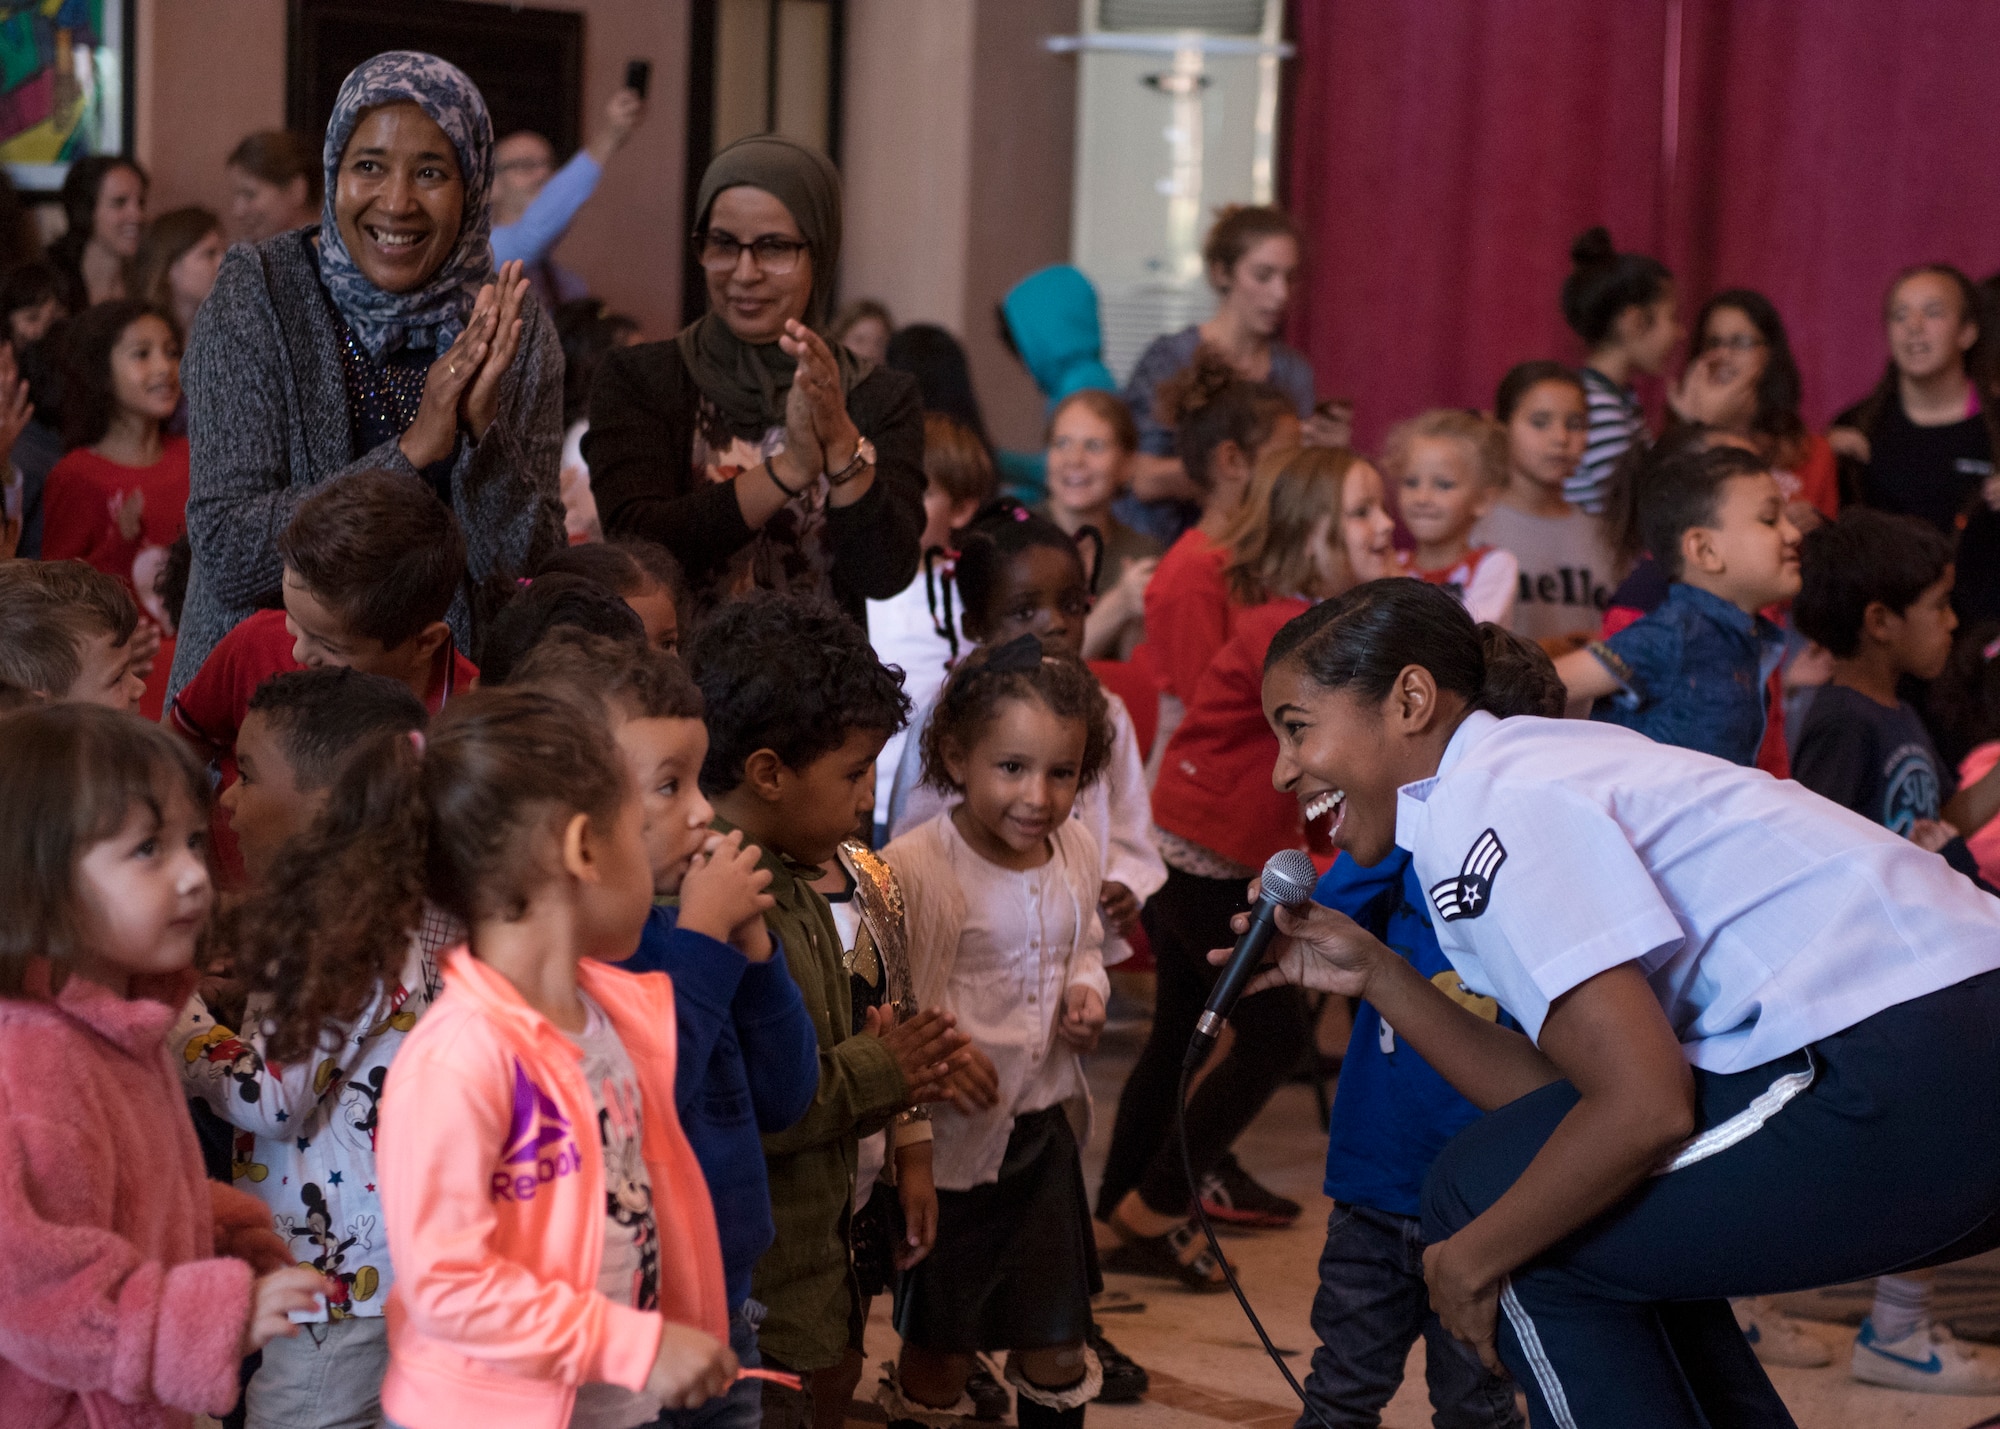 Air Force singer performing for children in Morocco